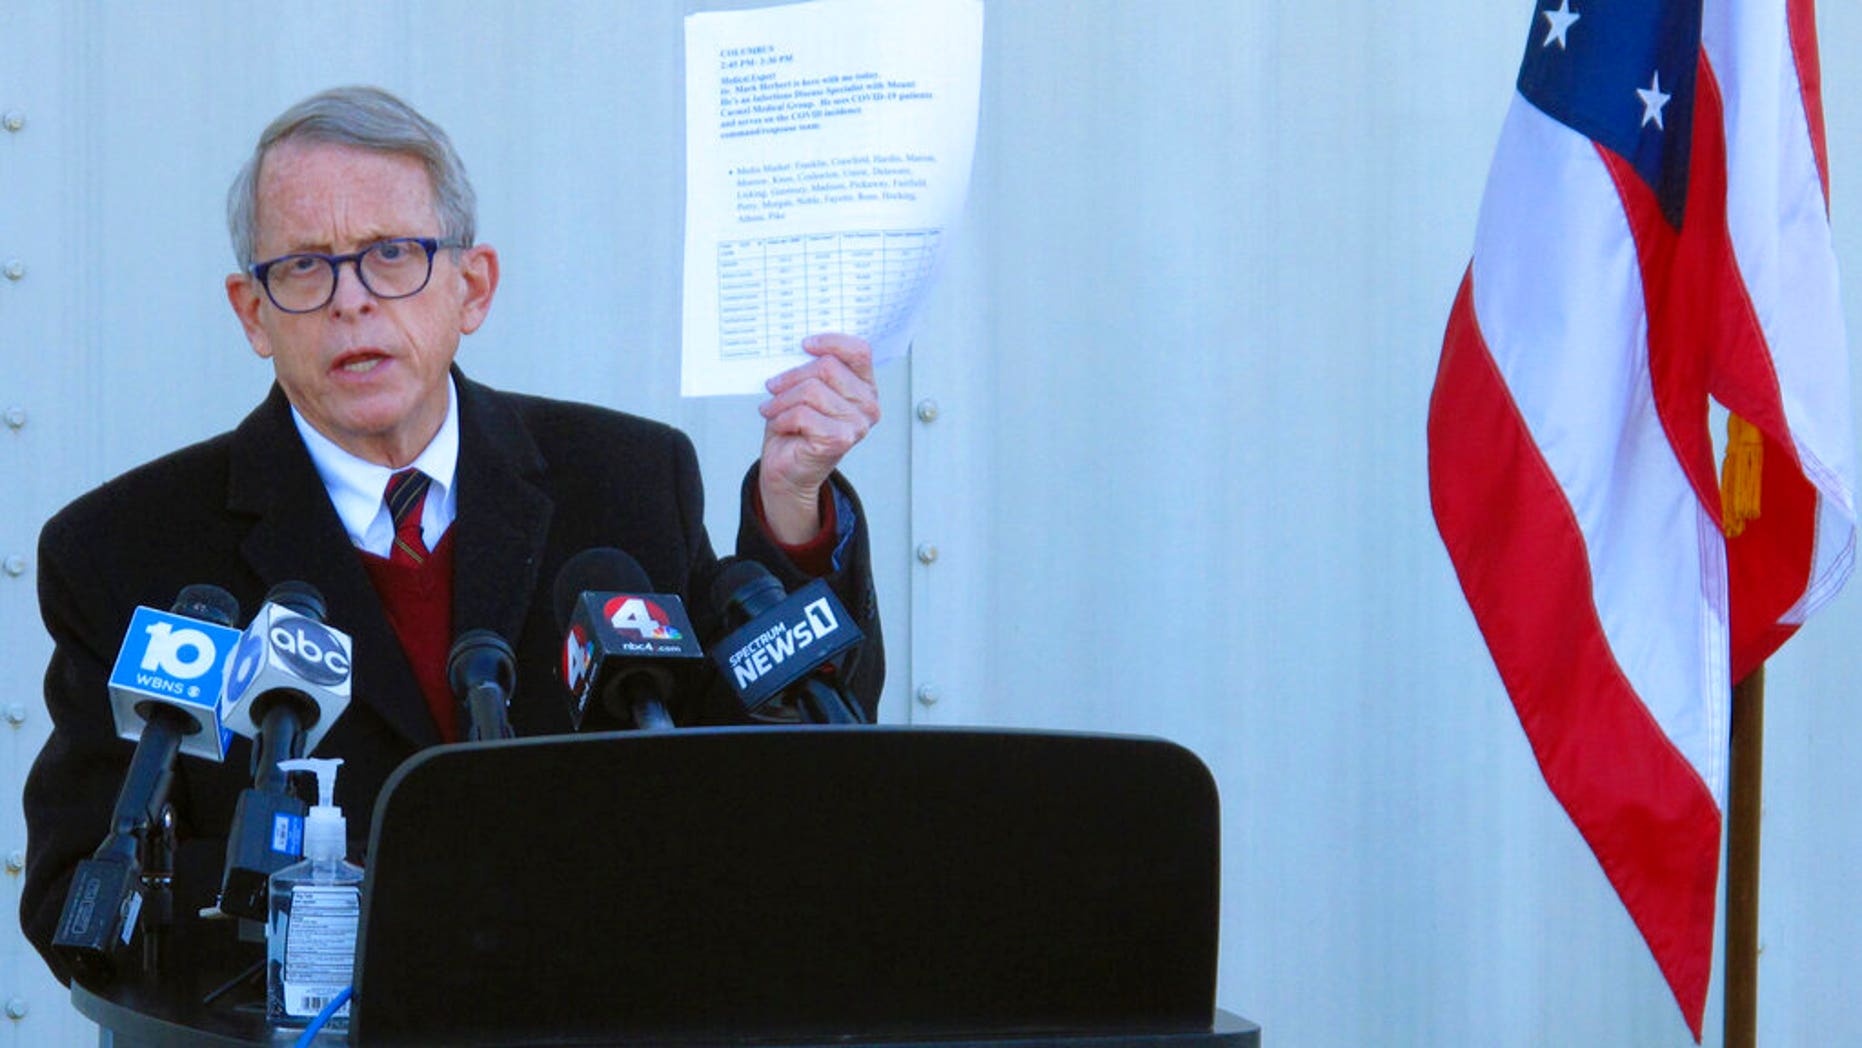 Ohio Gov. Mike DeWine announces $1M lottery for vaccinated citizens